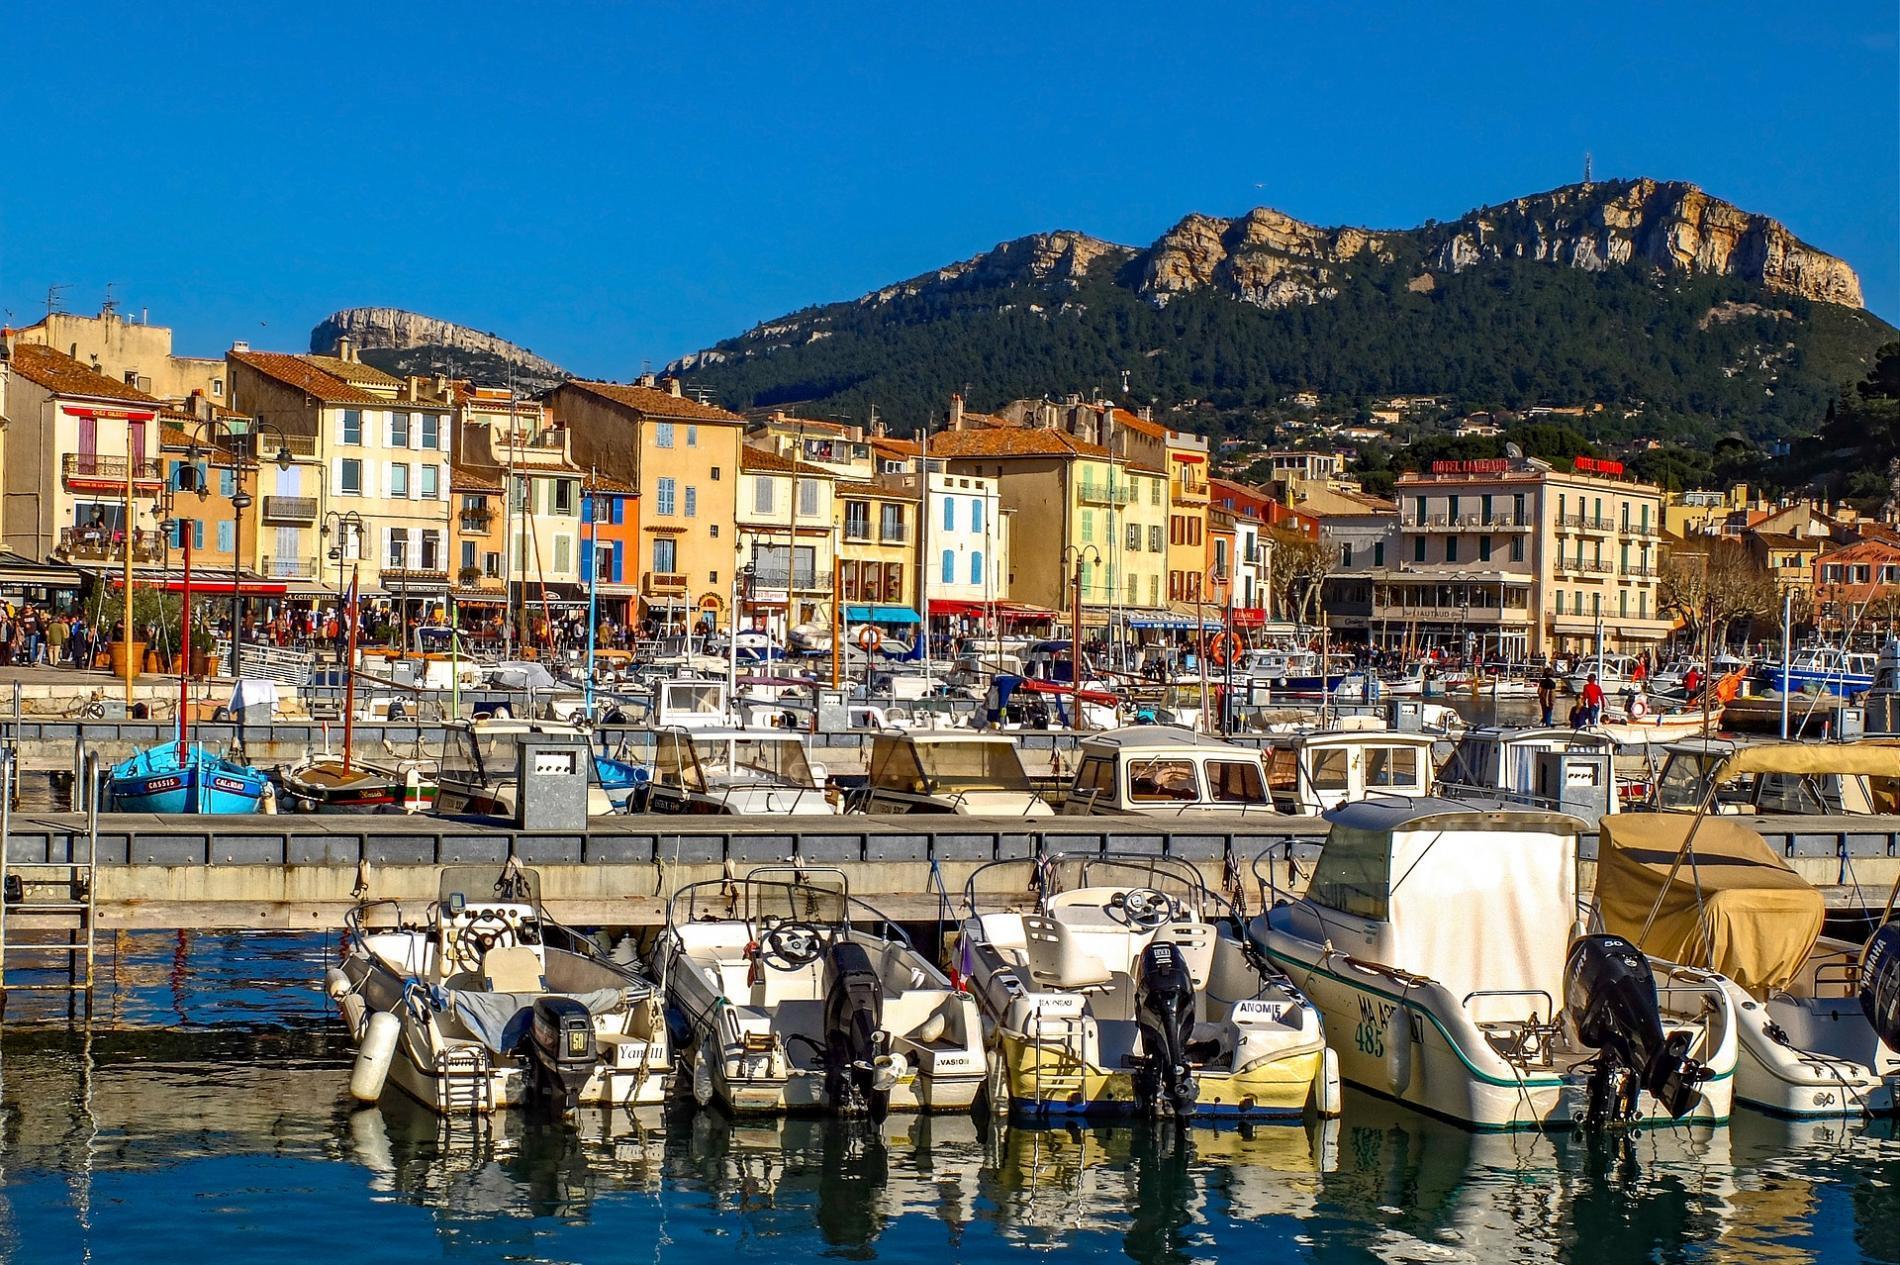 CHARMING DETAILS OF CASSIS